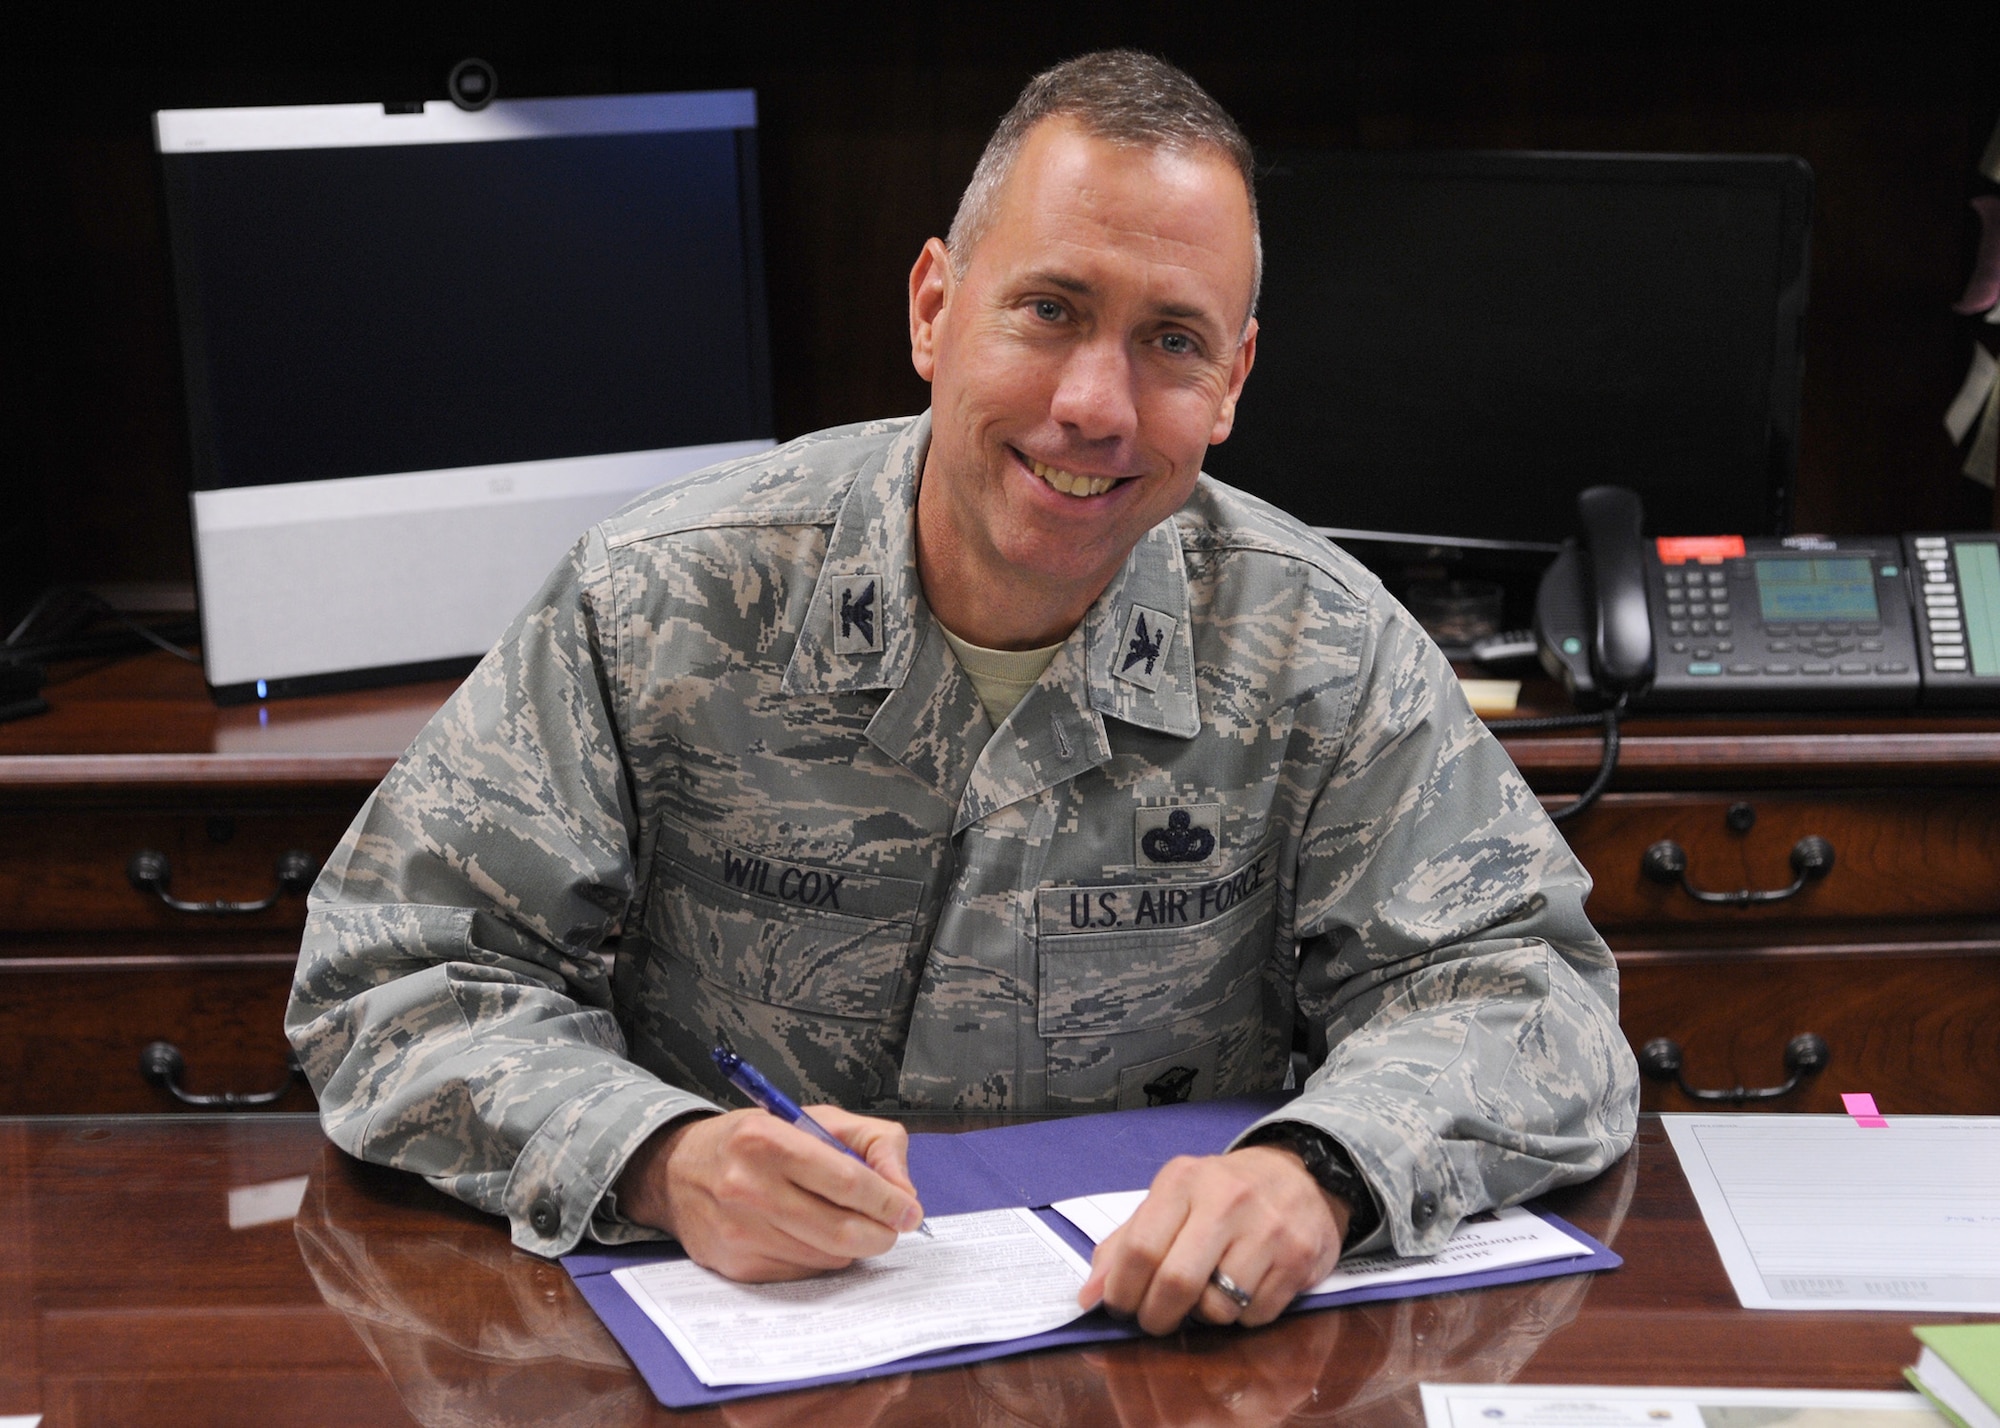 Col. Tom Wilcox, 341st Missile Wing commander, finishes up some paperwork at his desk April 1. Wilcox started his career at Malmstrom Air Force Base as a flight leader and is “glad to be back,” he said. (U.S. Air Force photo/Senior Airman Cortney Paxton)